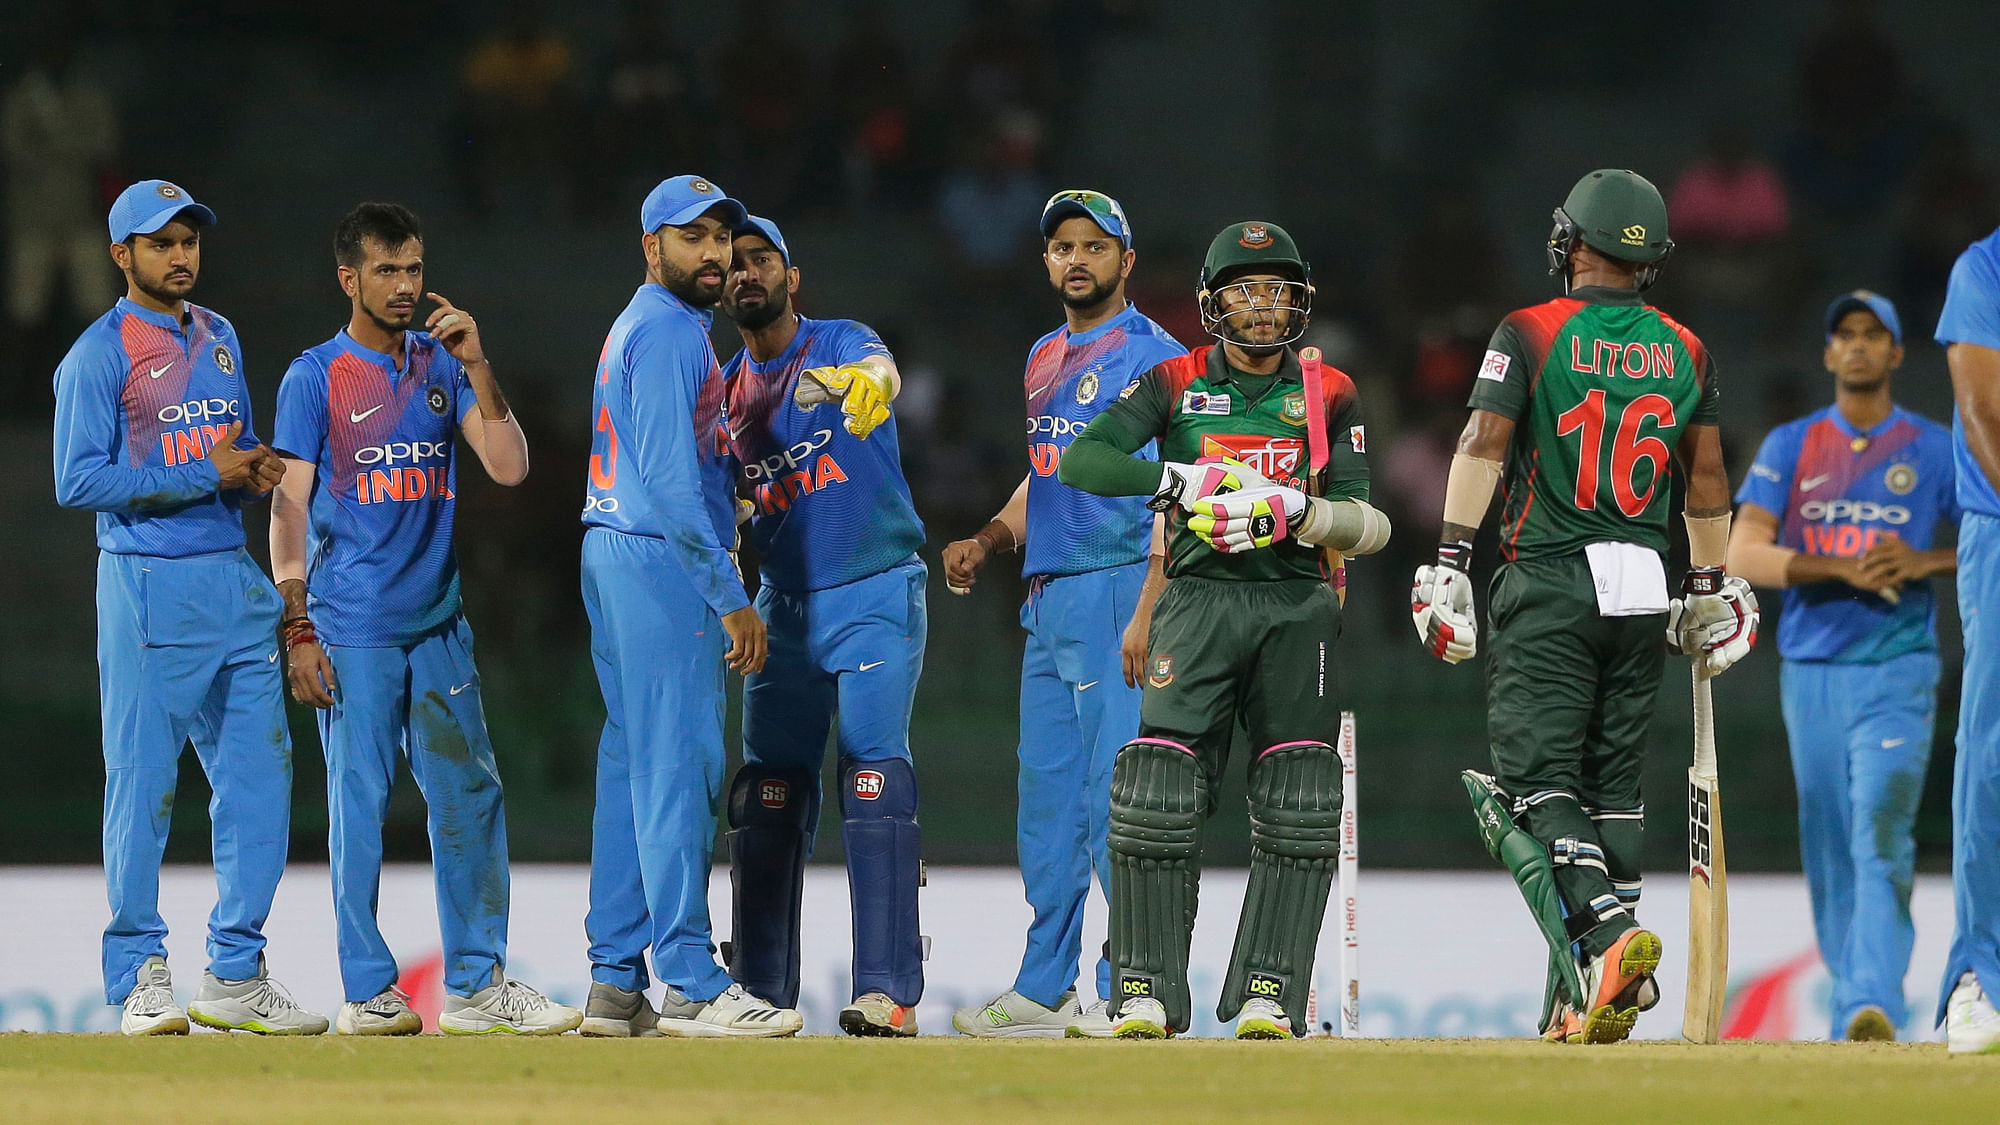 India beat Bangladesh by 6 wickets on Thursday in the Nidahas T20 Trophy.